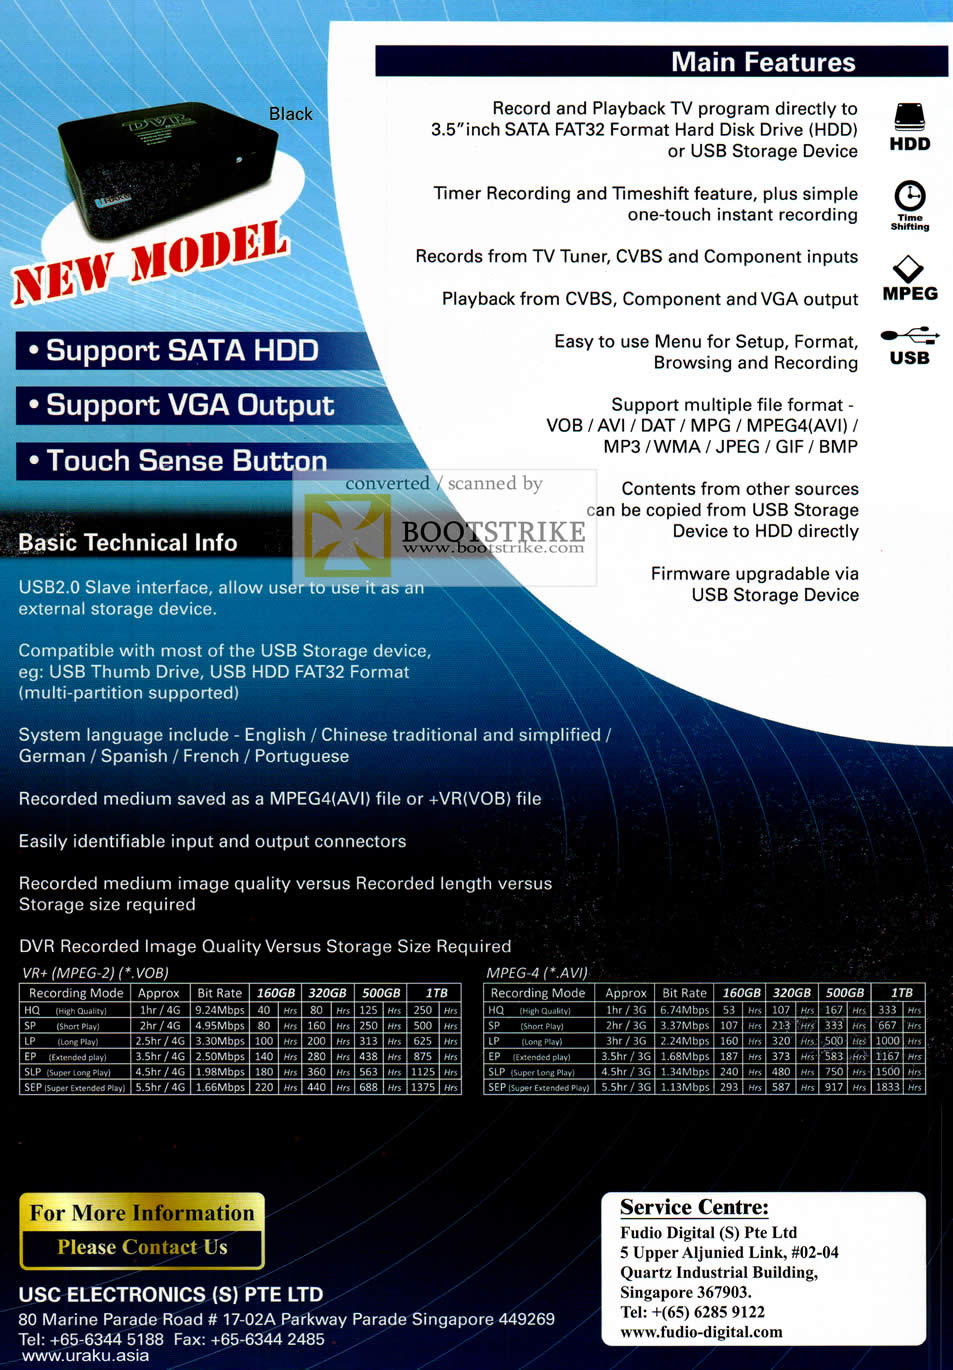 PC SHOW 2012 price list image brochure of Bell Systems Uraku Media Player NV-812 DVR Digital Video Recorder Features Specifications